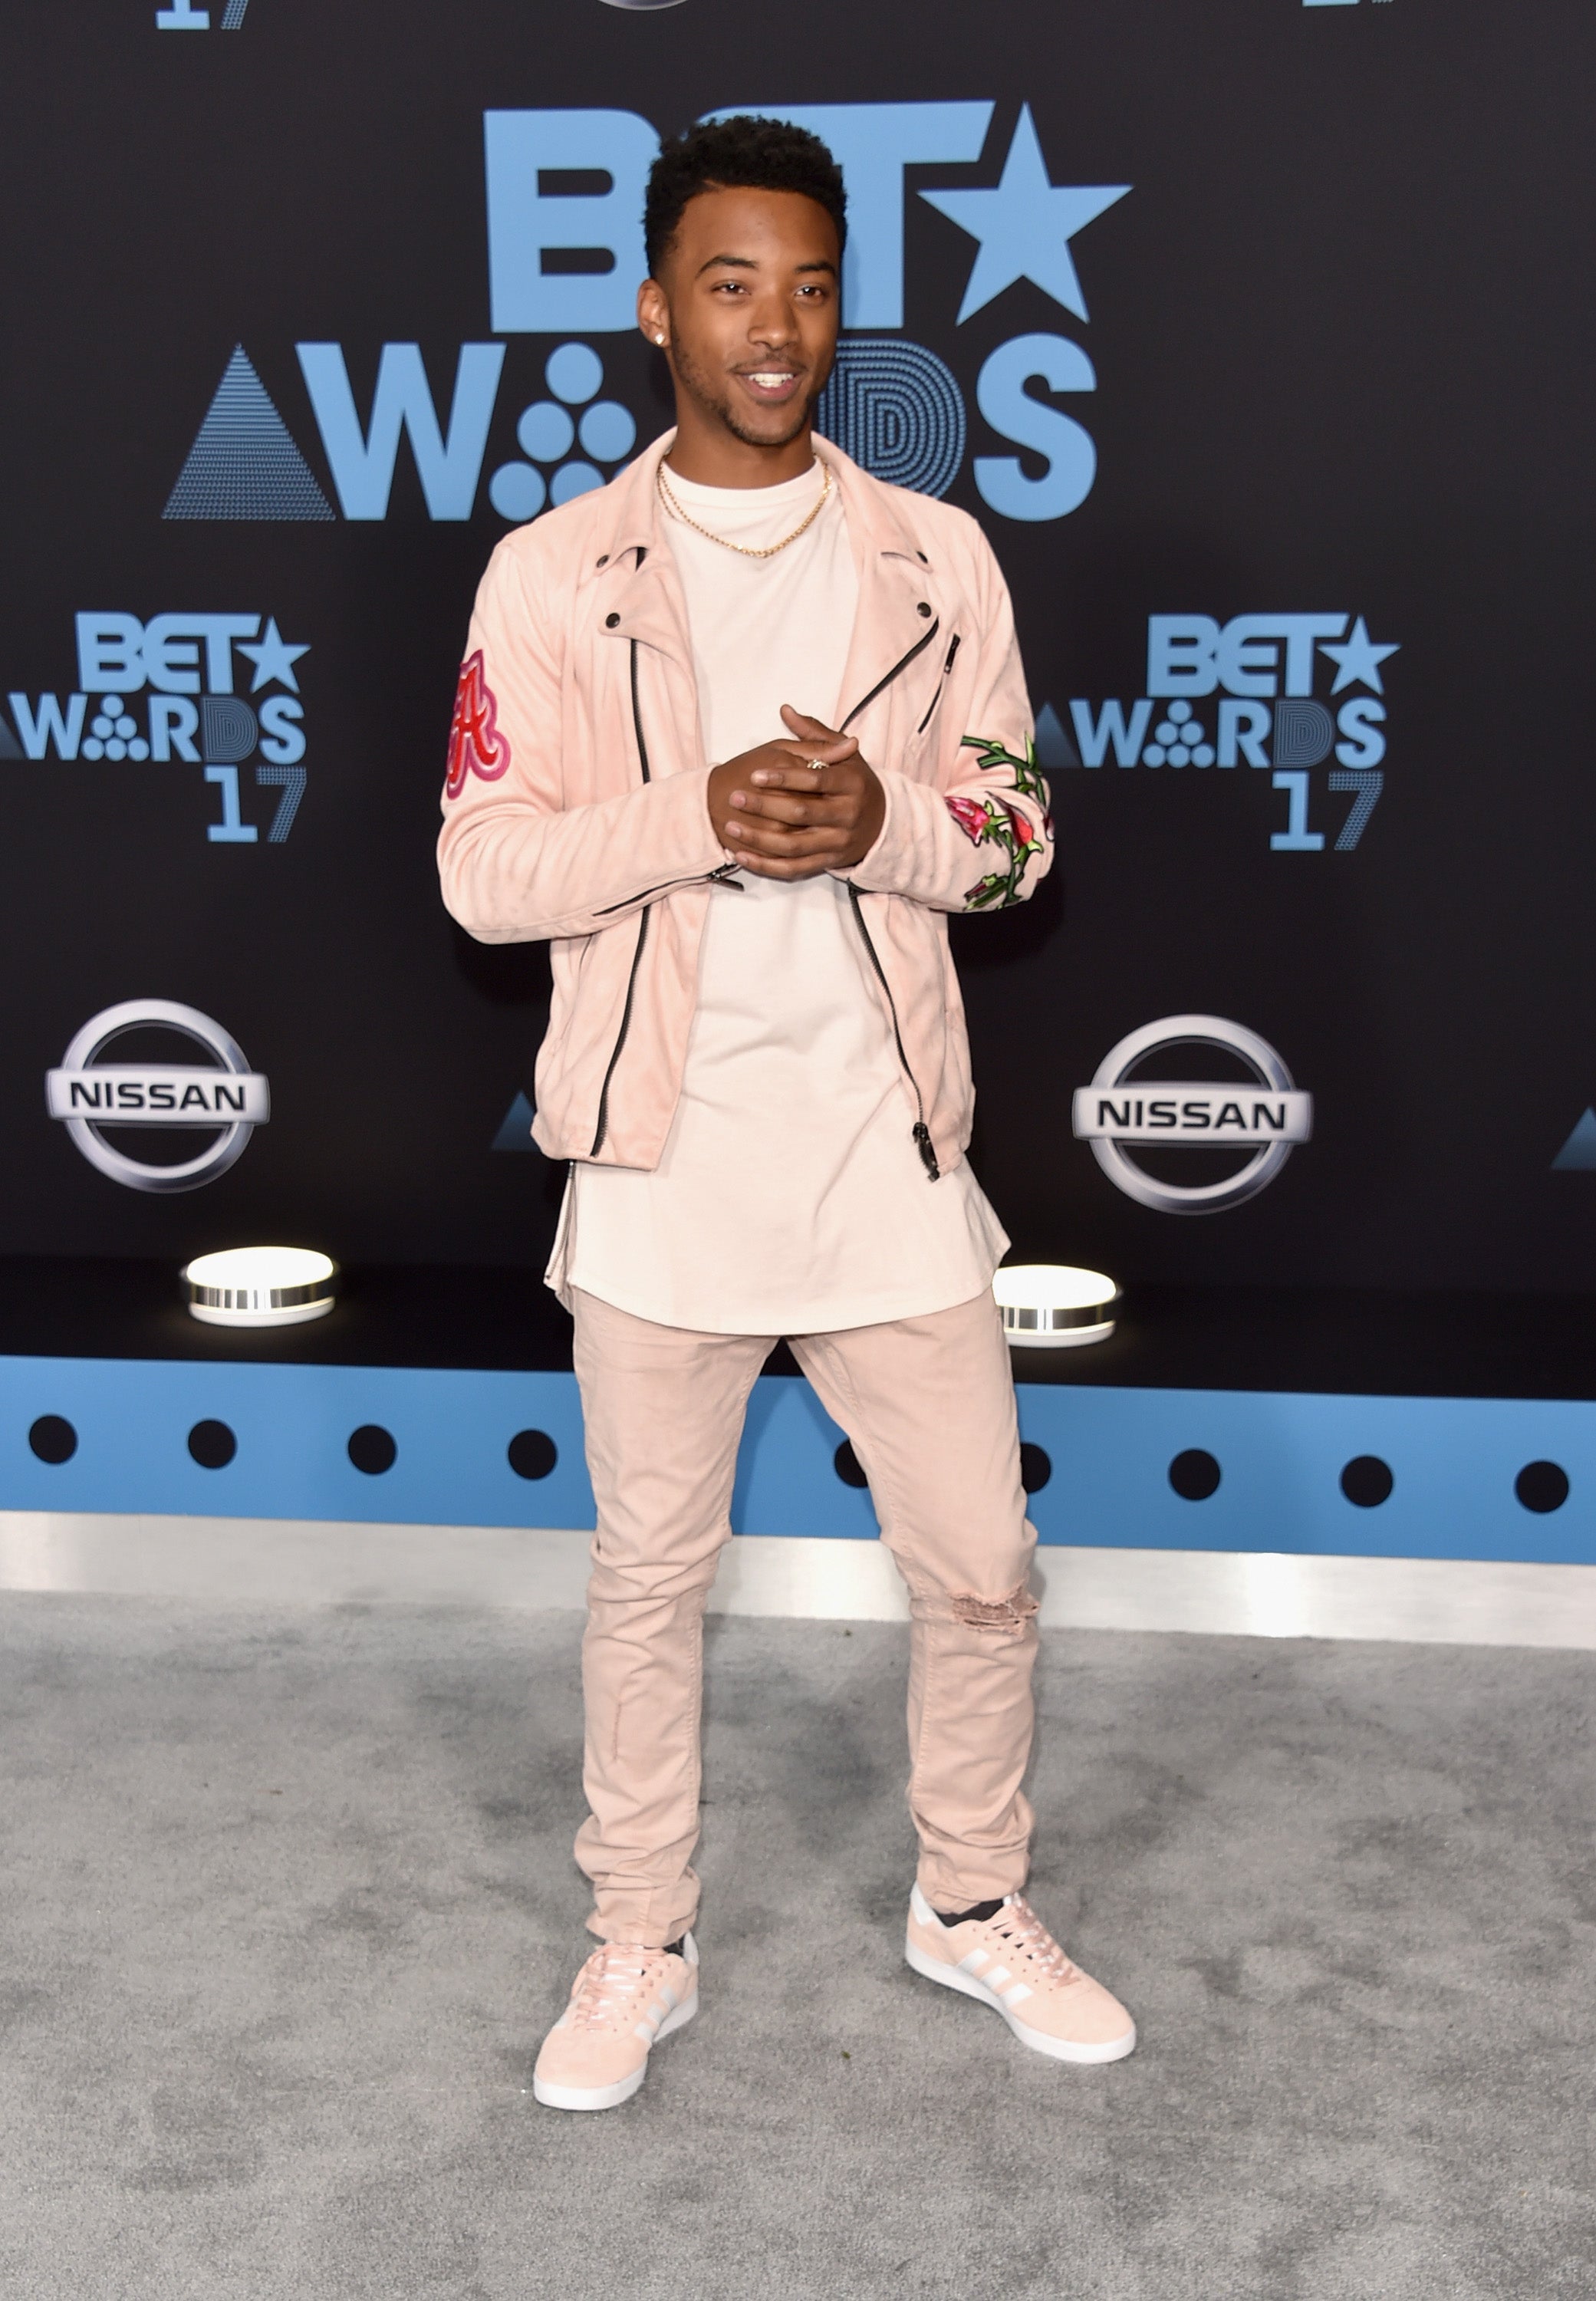 The Eye Candy Was On Full Display At The 2017 BET Awards
